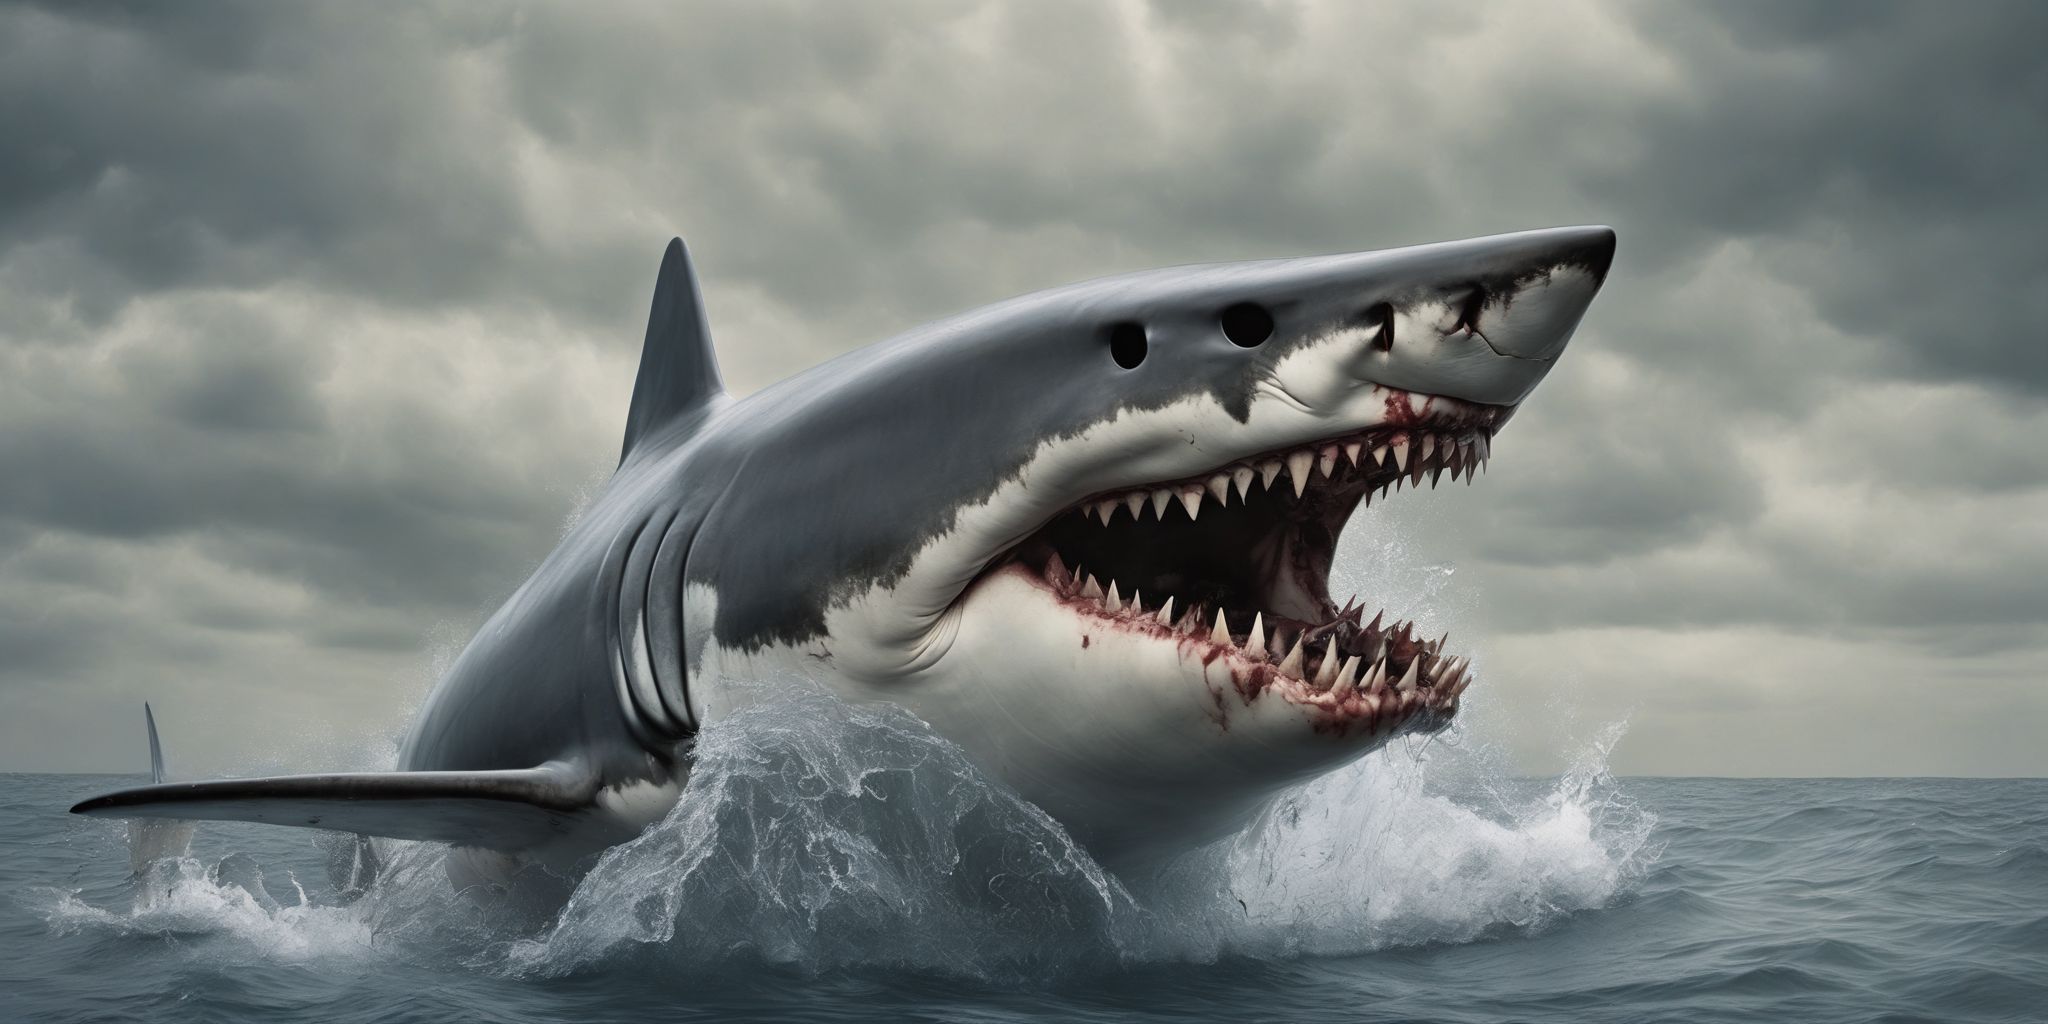 Jaws  in realistic, photographic style